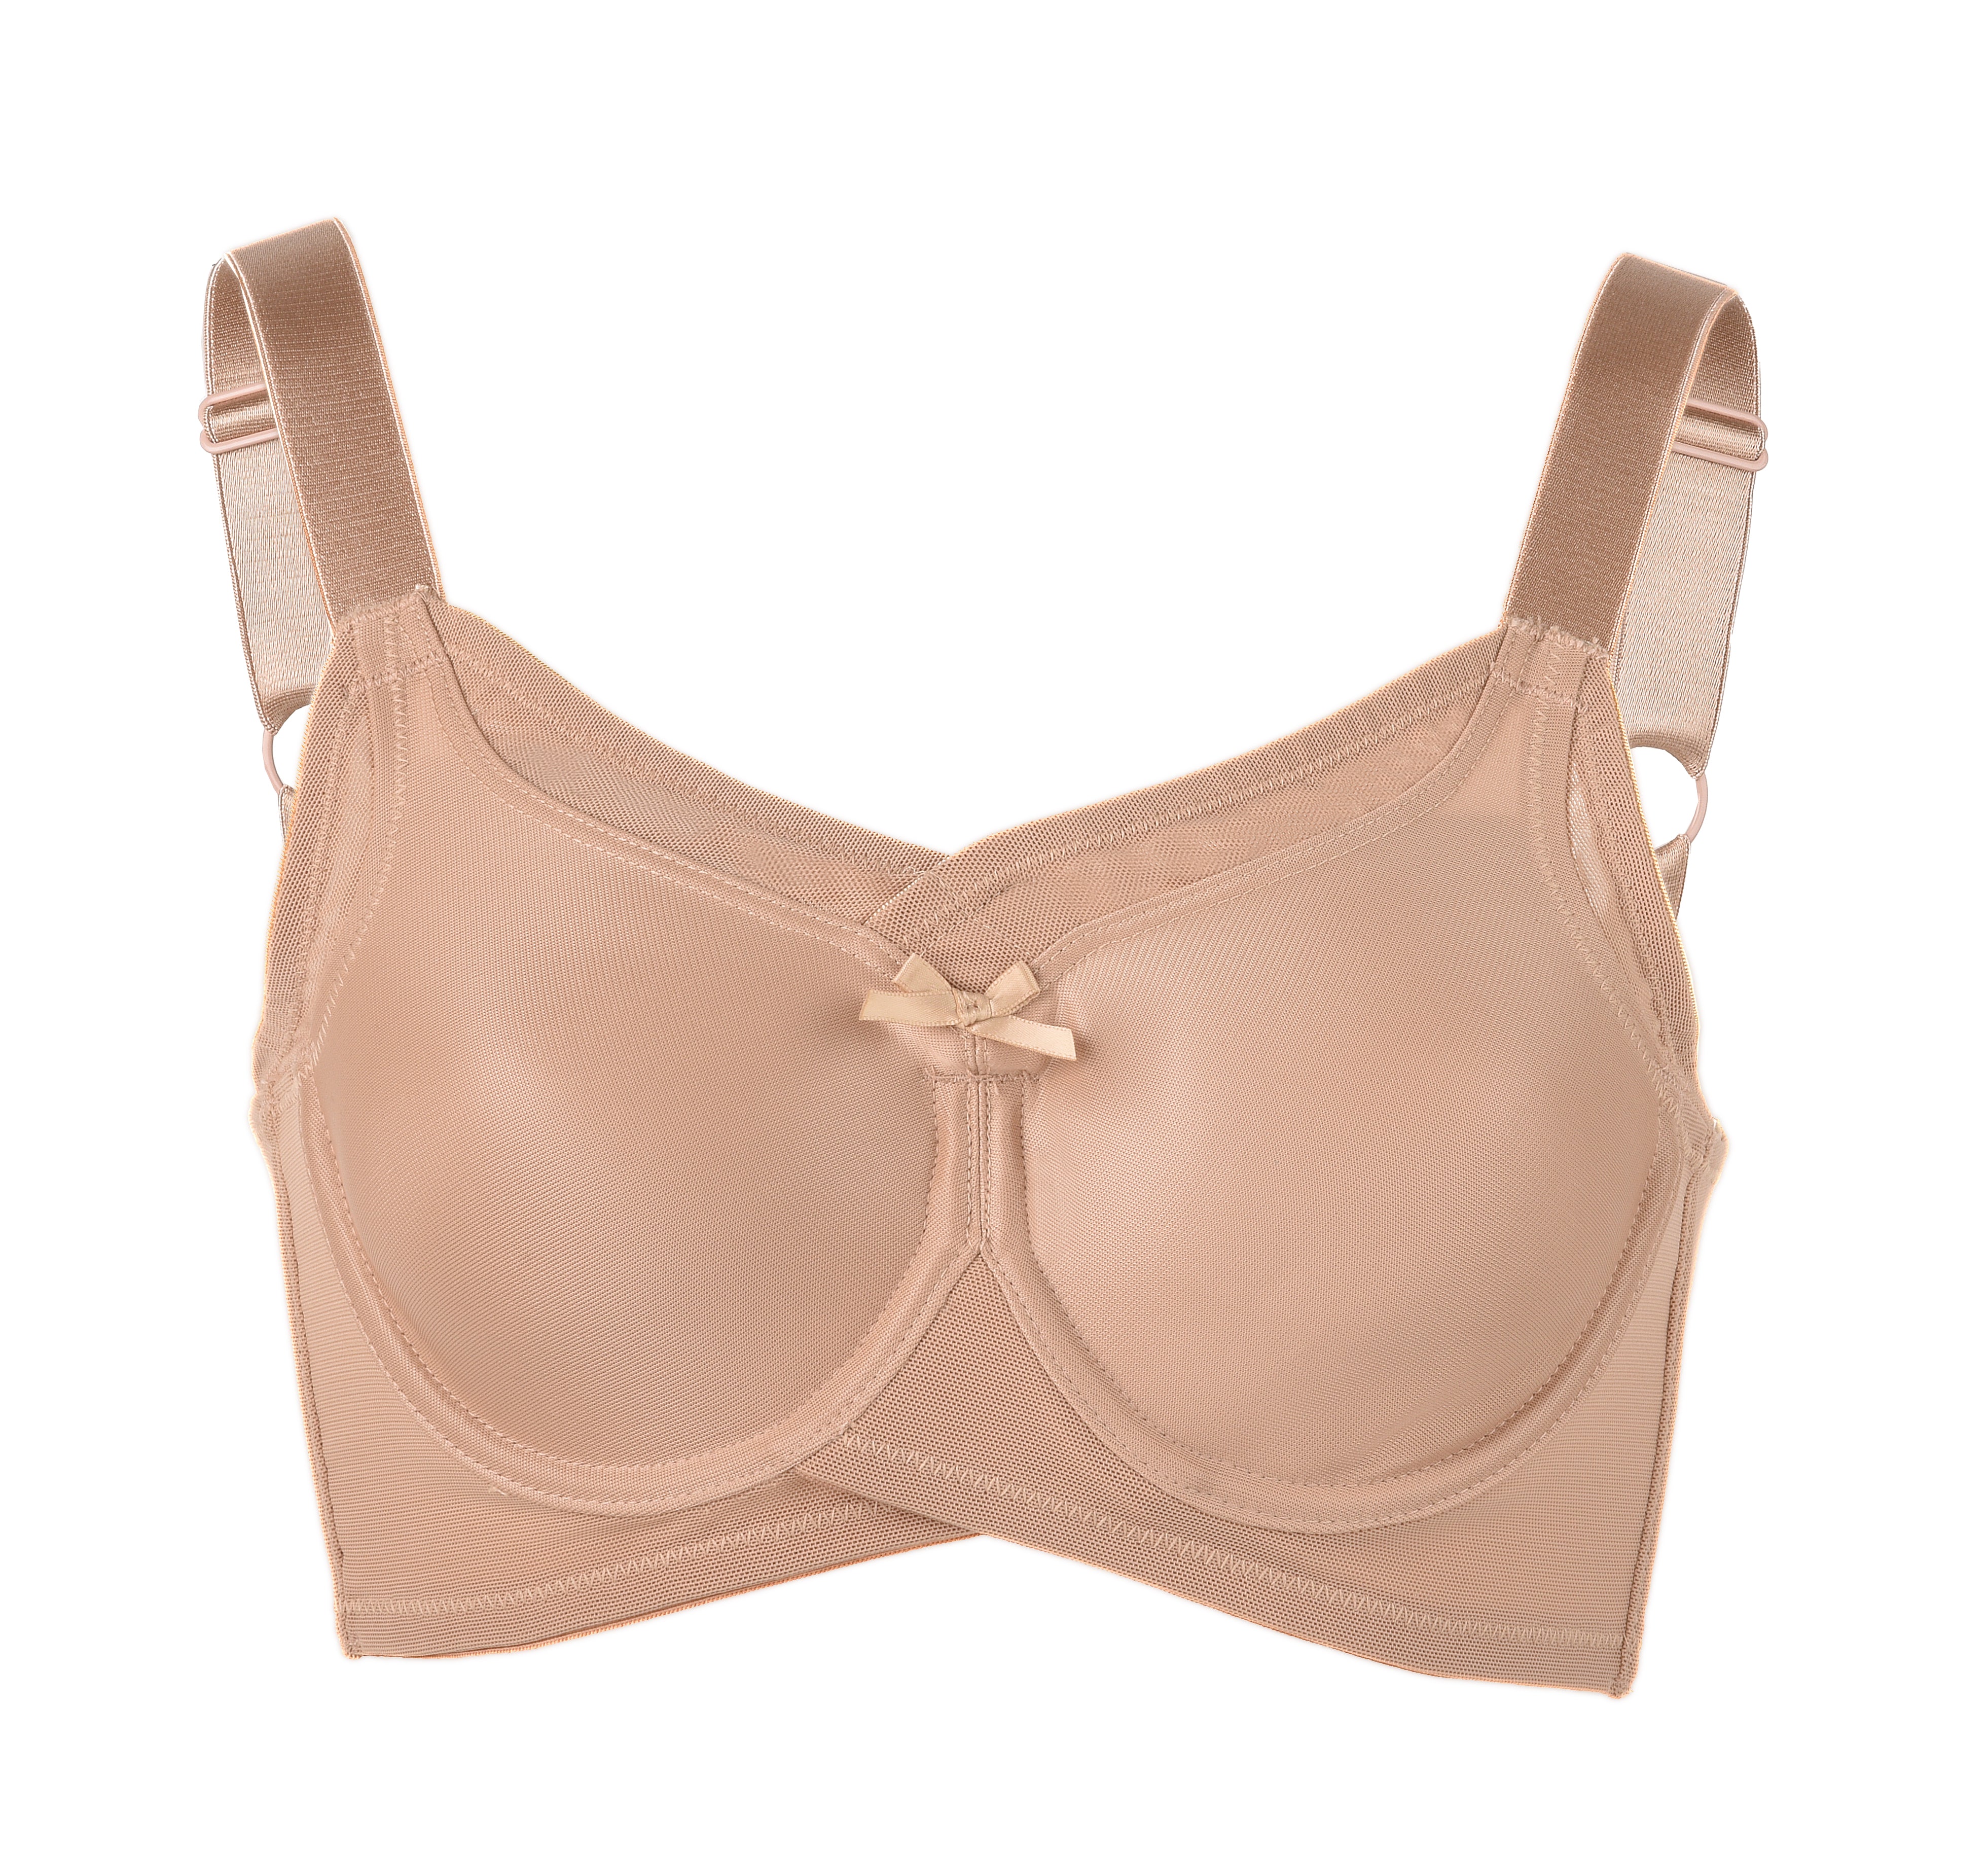 Kaye Larcky Bras: Support & Style for All